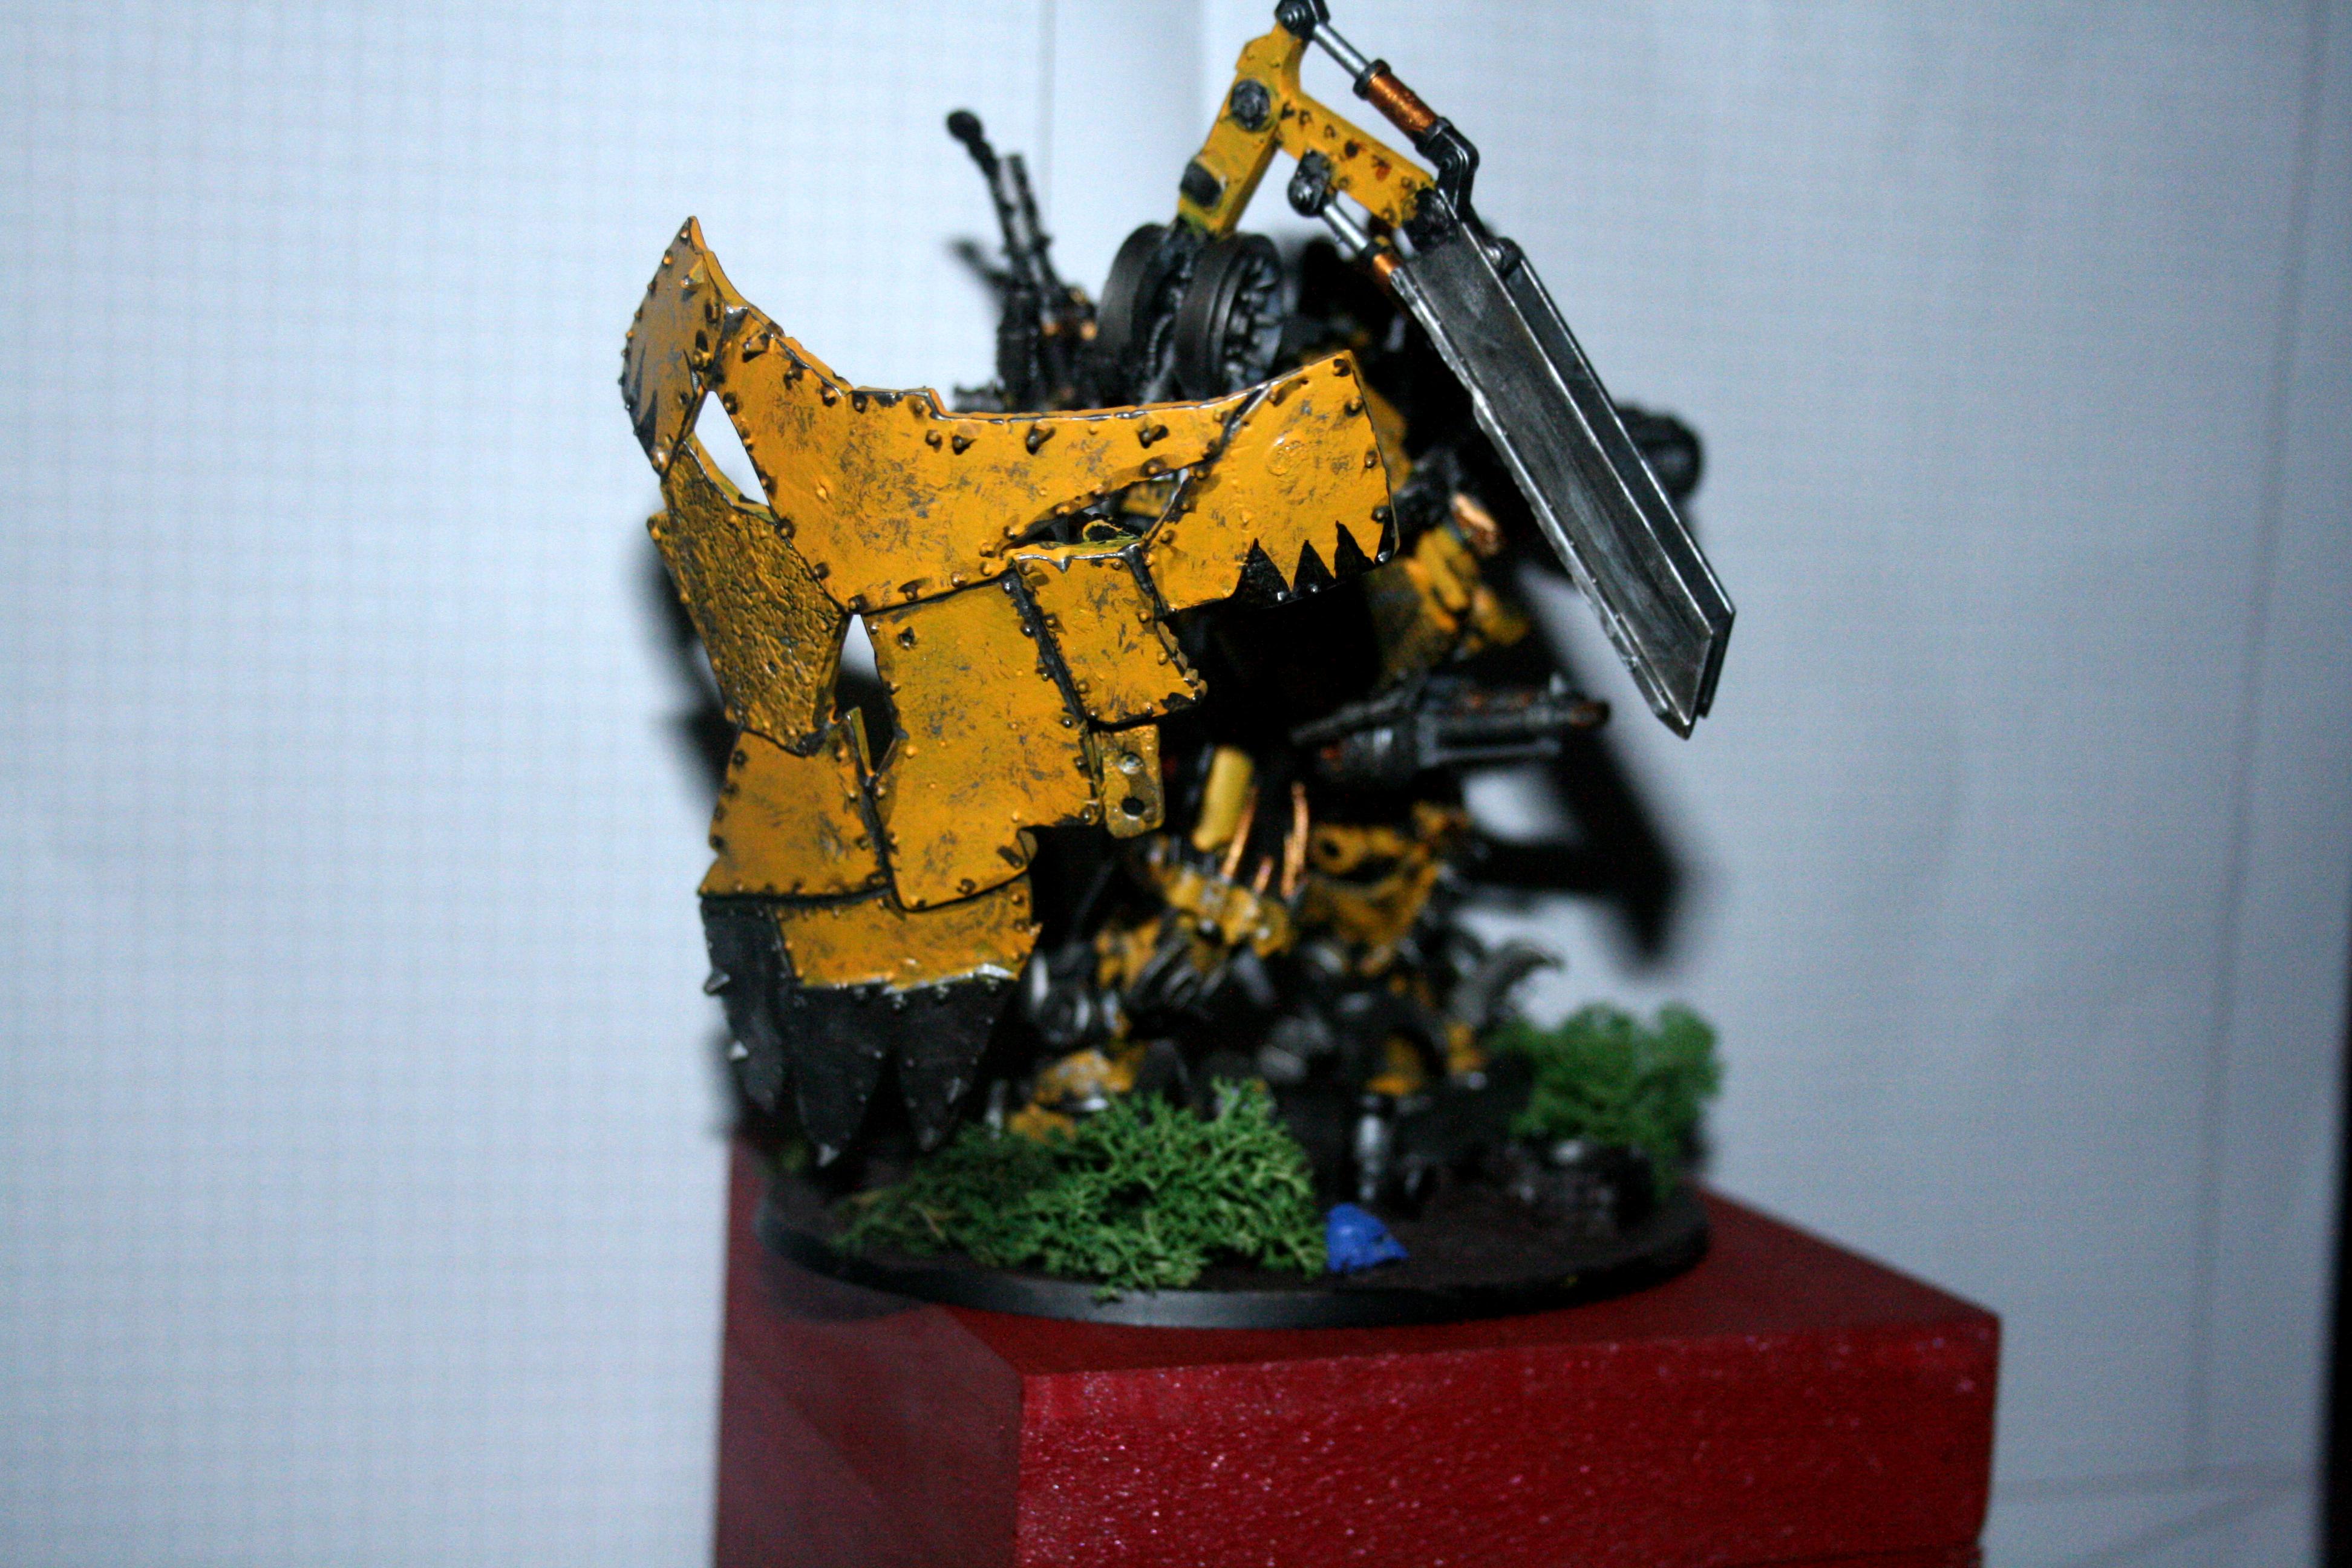 Armored, Death, Deff, Deff Dread, Dred, Looted, Nemesis, Orks, Warhammer 40,000